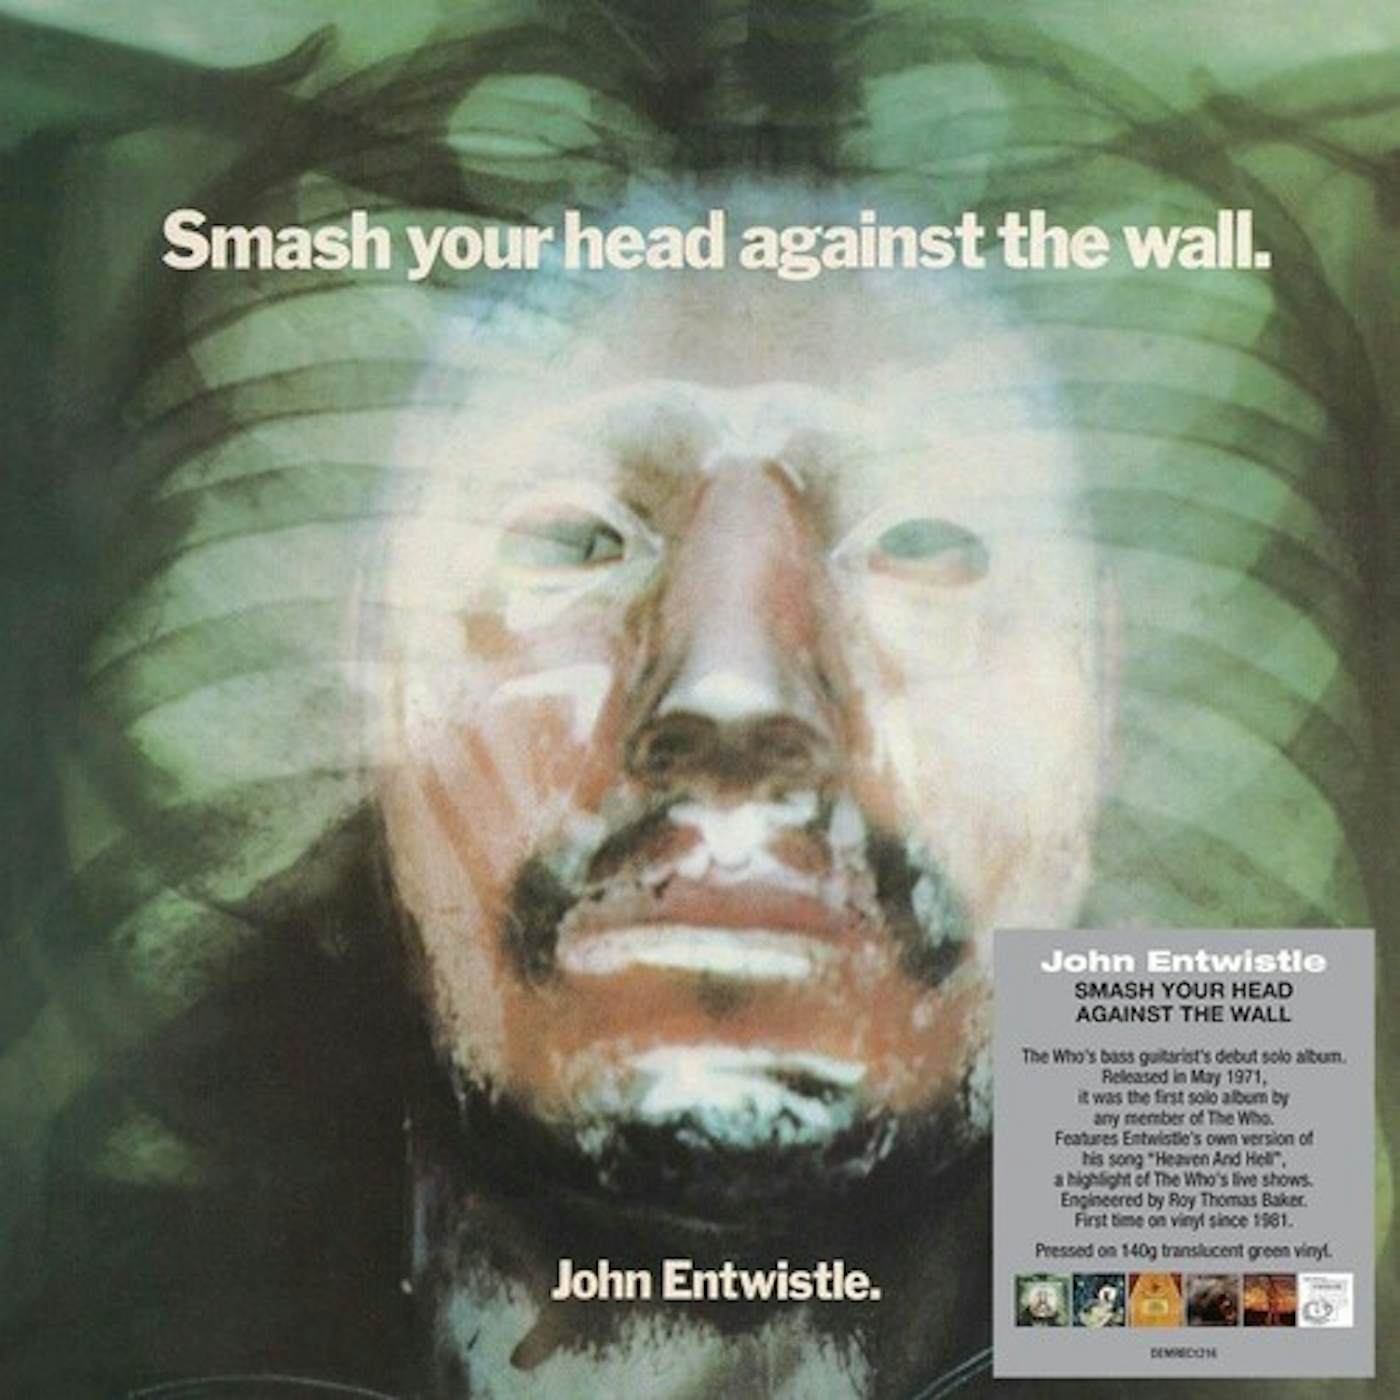 John Entwistle Smash Your Head Against The Wall (Green) Vinyl Record